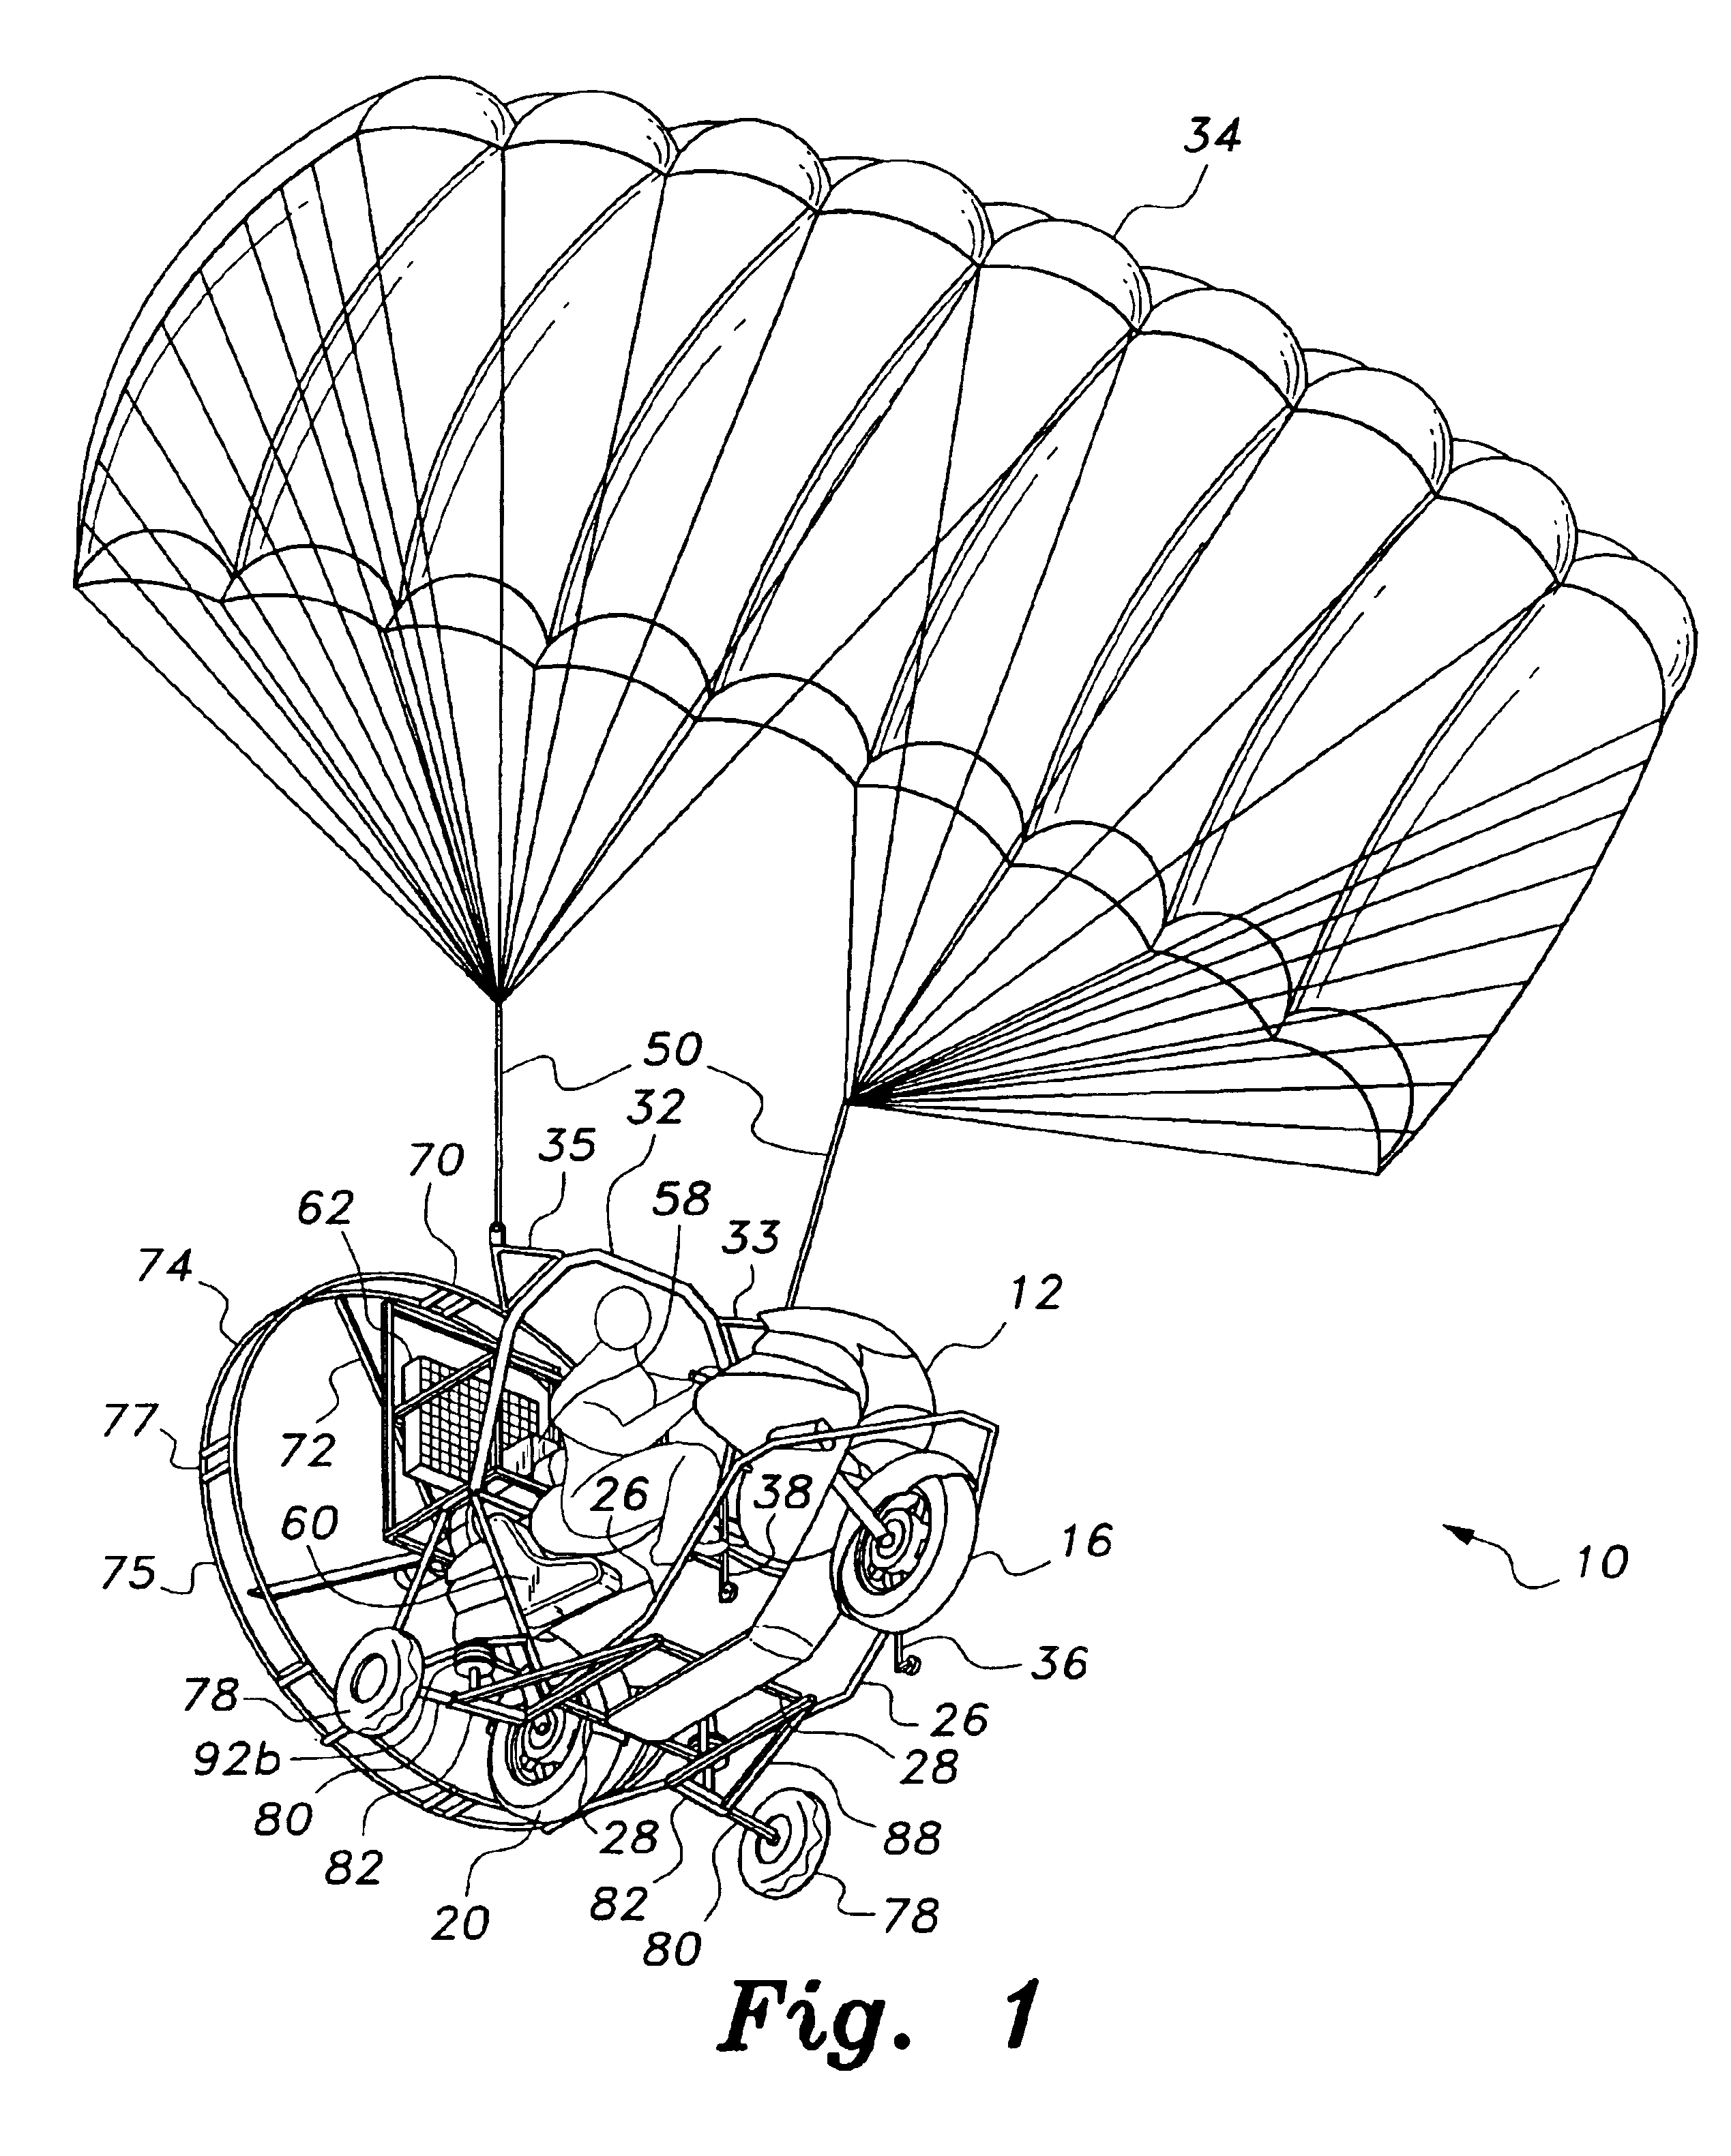 Combination powered parachute and motorcycle